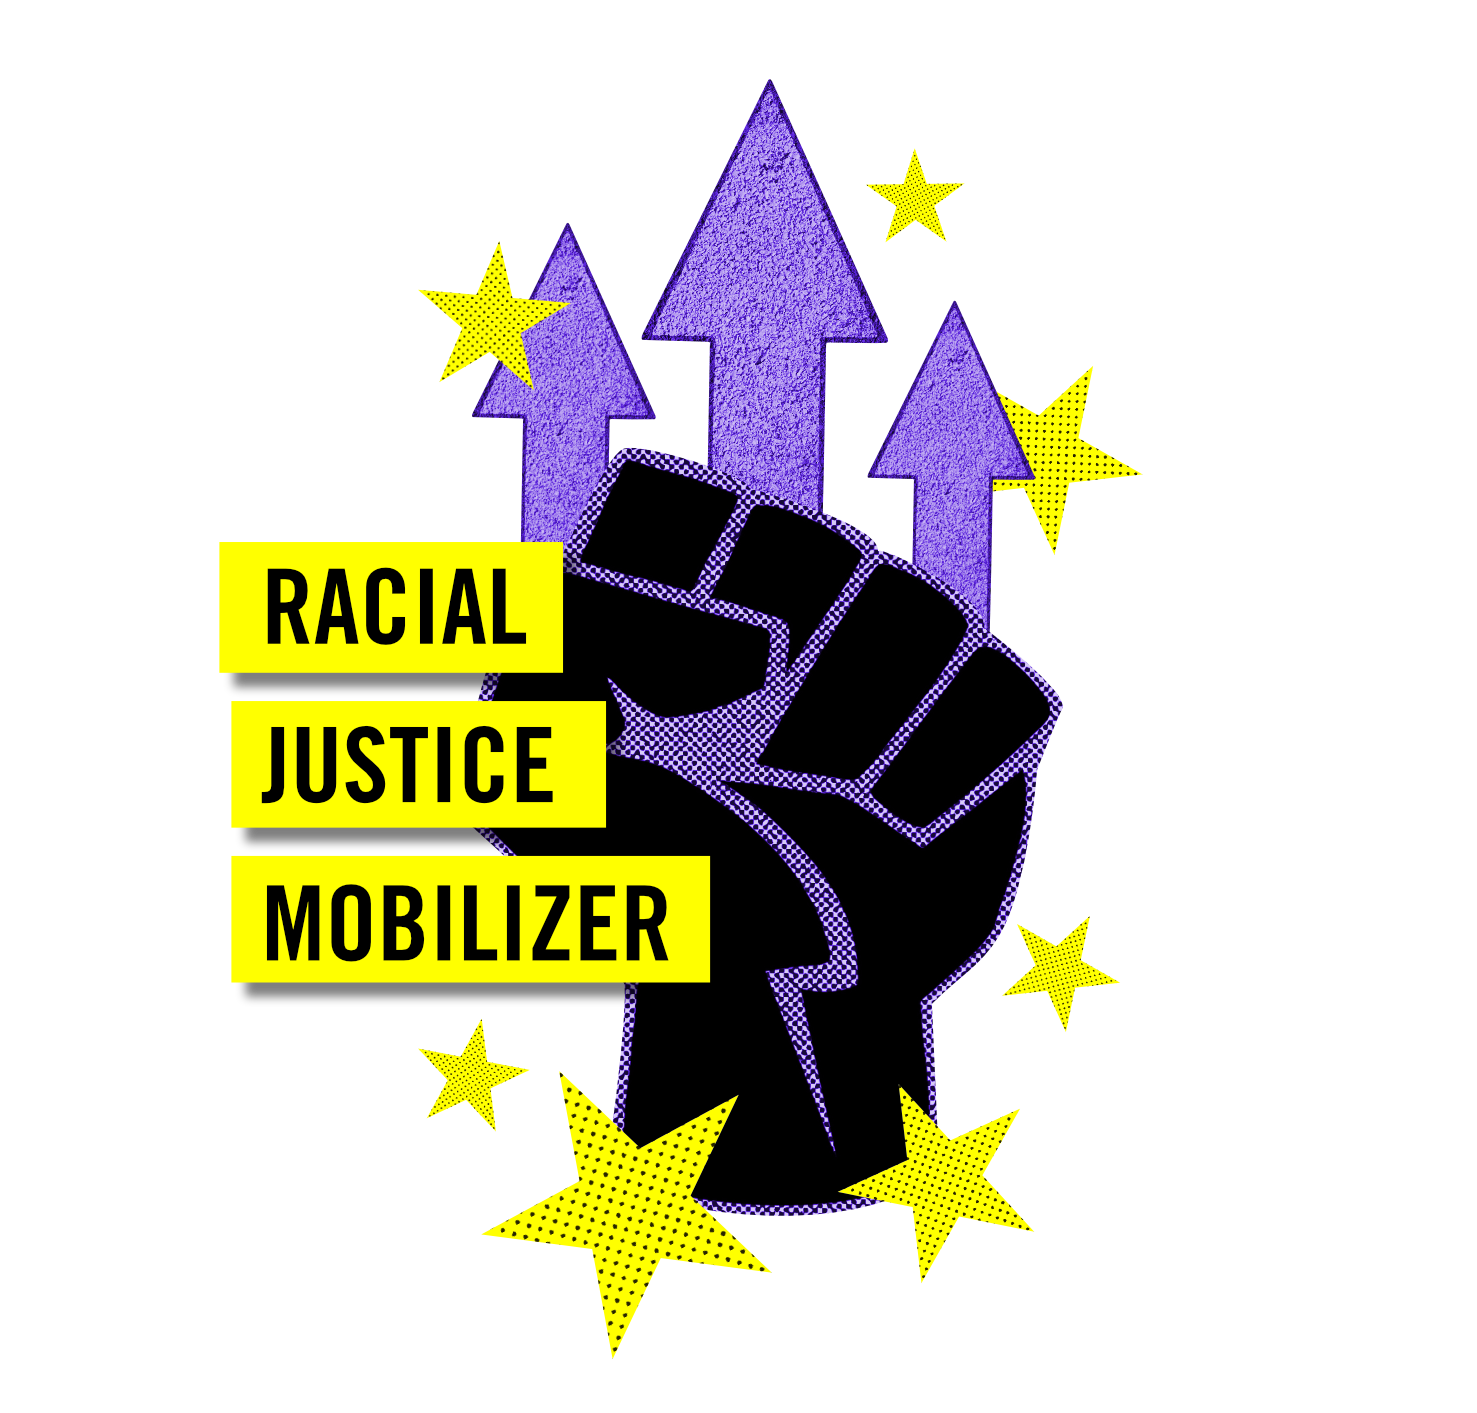 You’re a Racial Justice Mobilizer if you refuse to sit on the sidelines while police brutality, economic exclusion, racist immigration policies and so much more disproportionately impact Black, Indigenous and other racialized communities everywhere. We must dismantle systemic racism in all its forms.